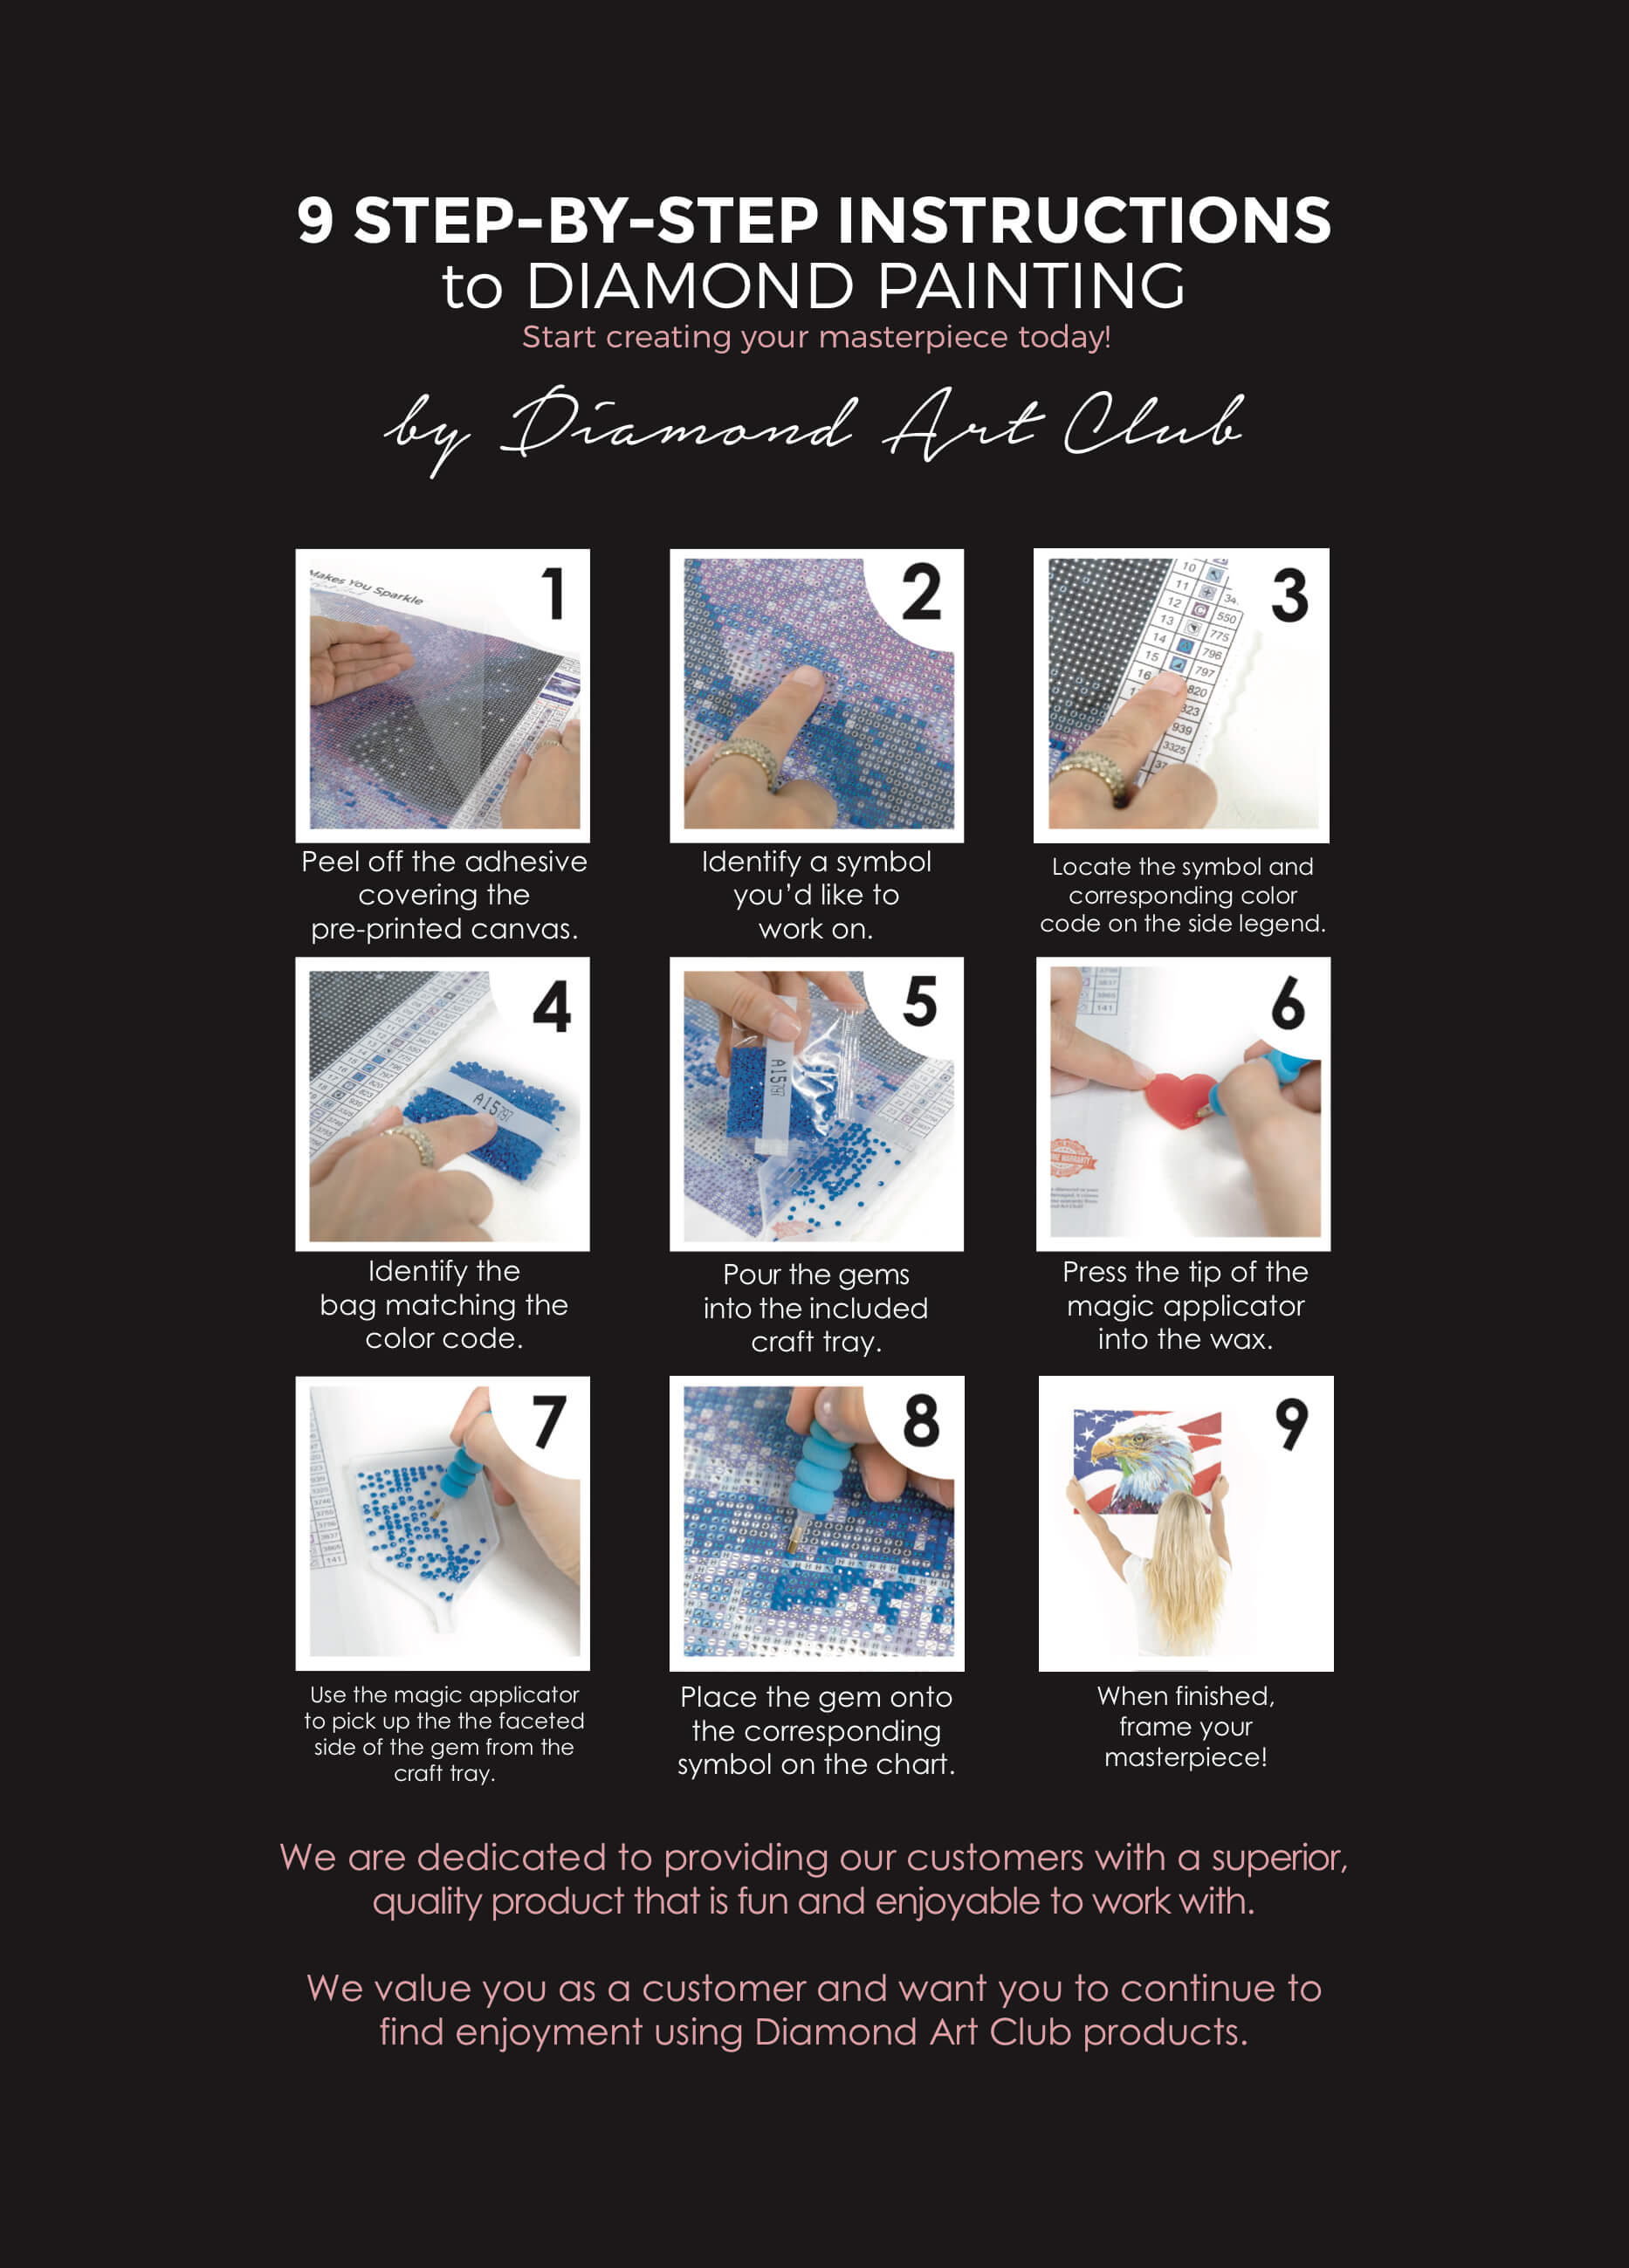 9 step by step instructions for diamond art painting